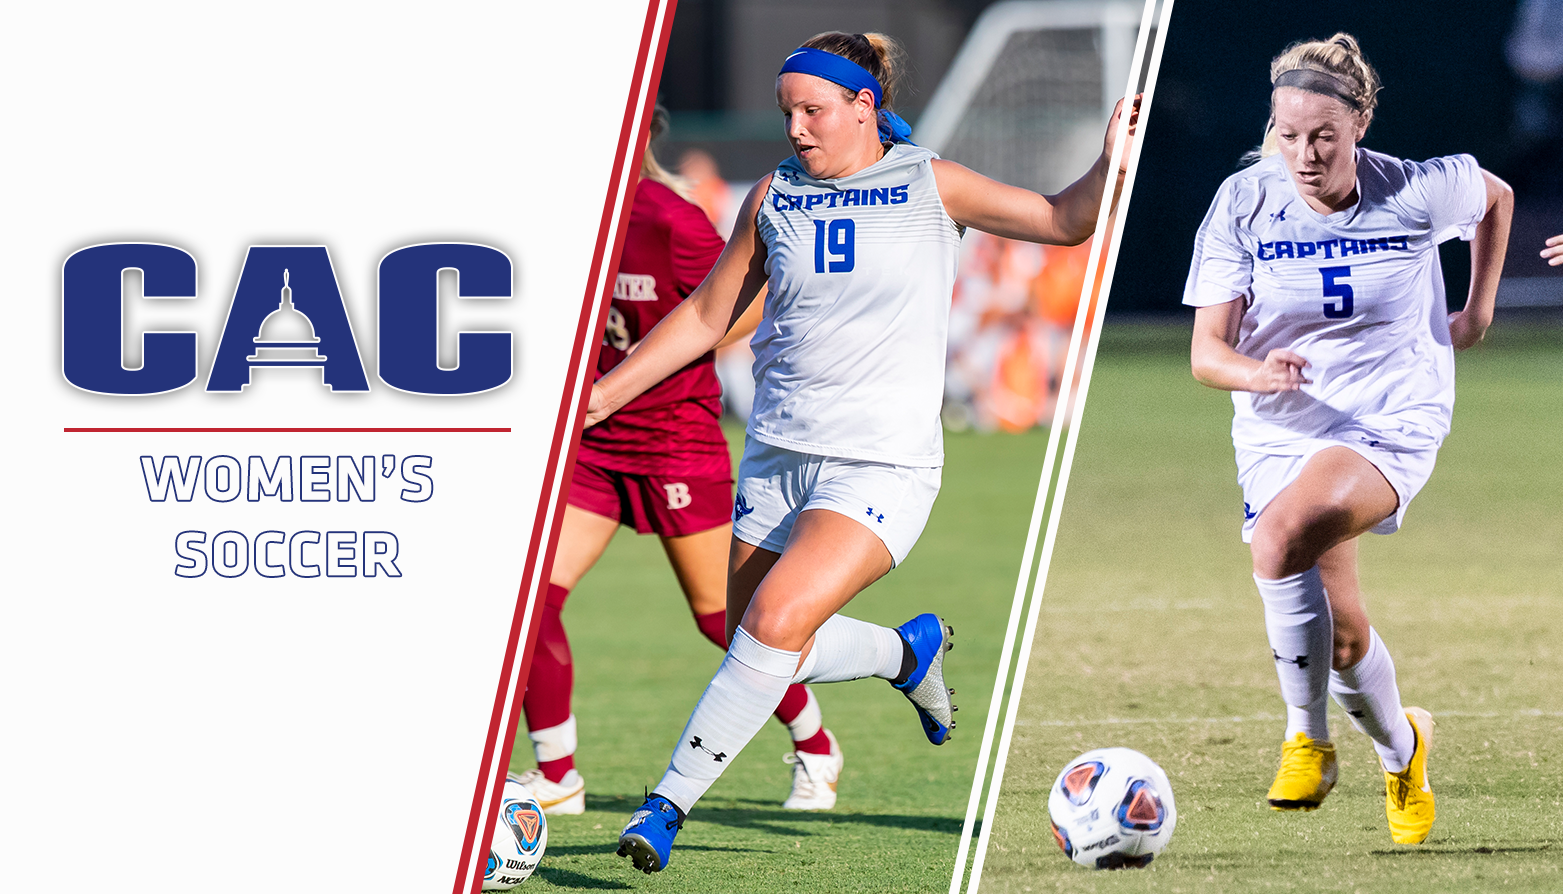 Christopher Newport's Cook & McCarthy Claim Top Honors; CAC Women's Soccer Awards Revealed